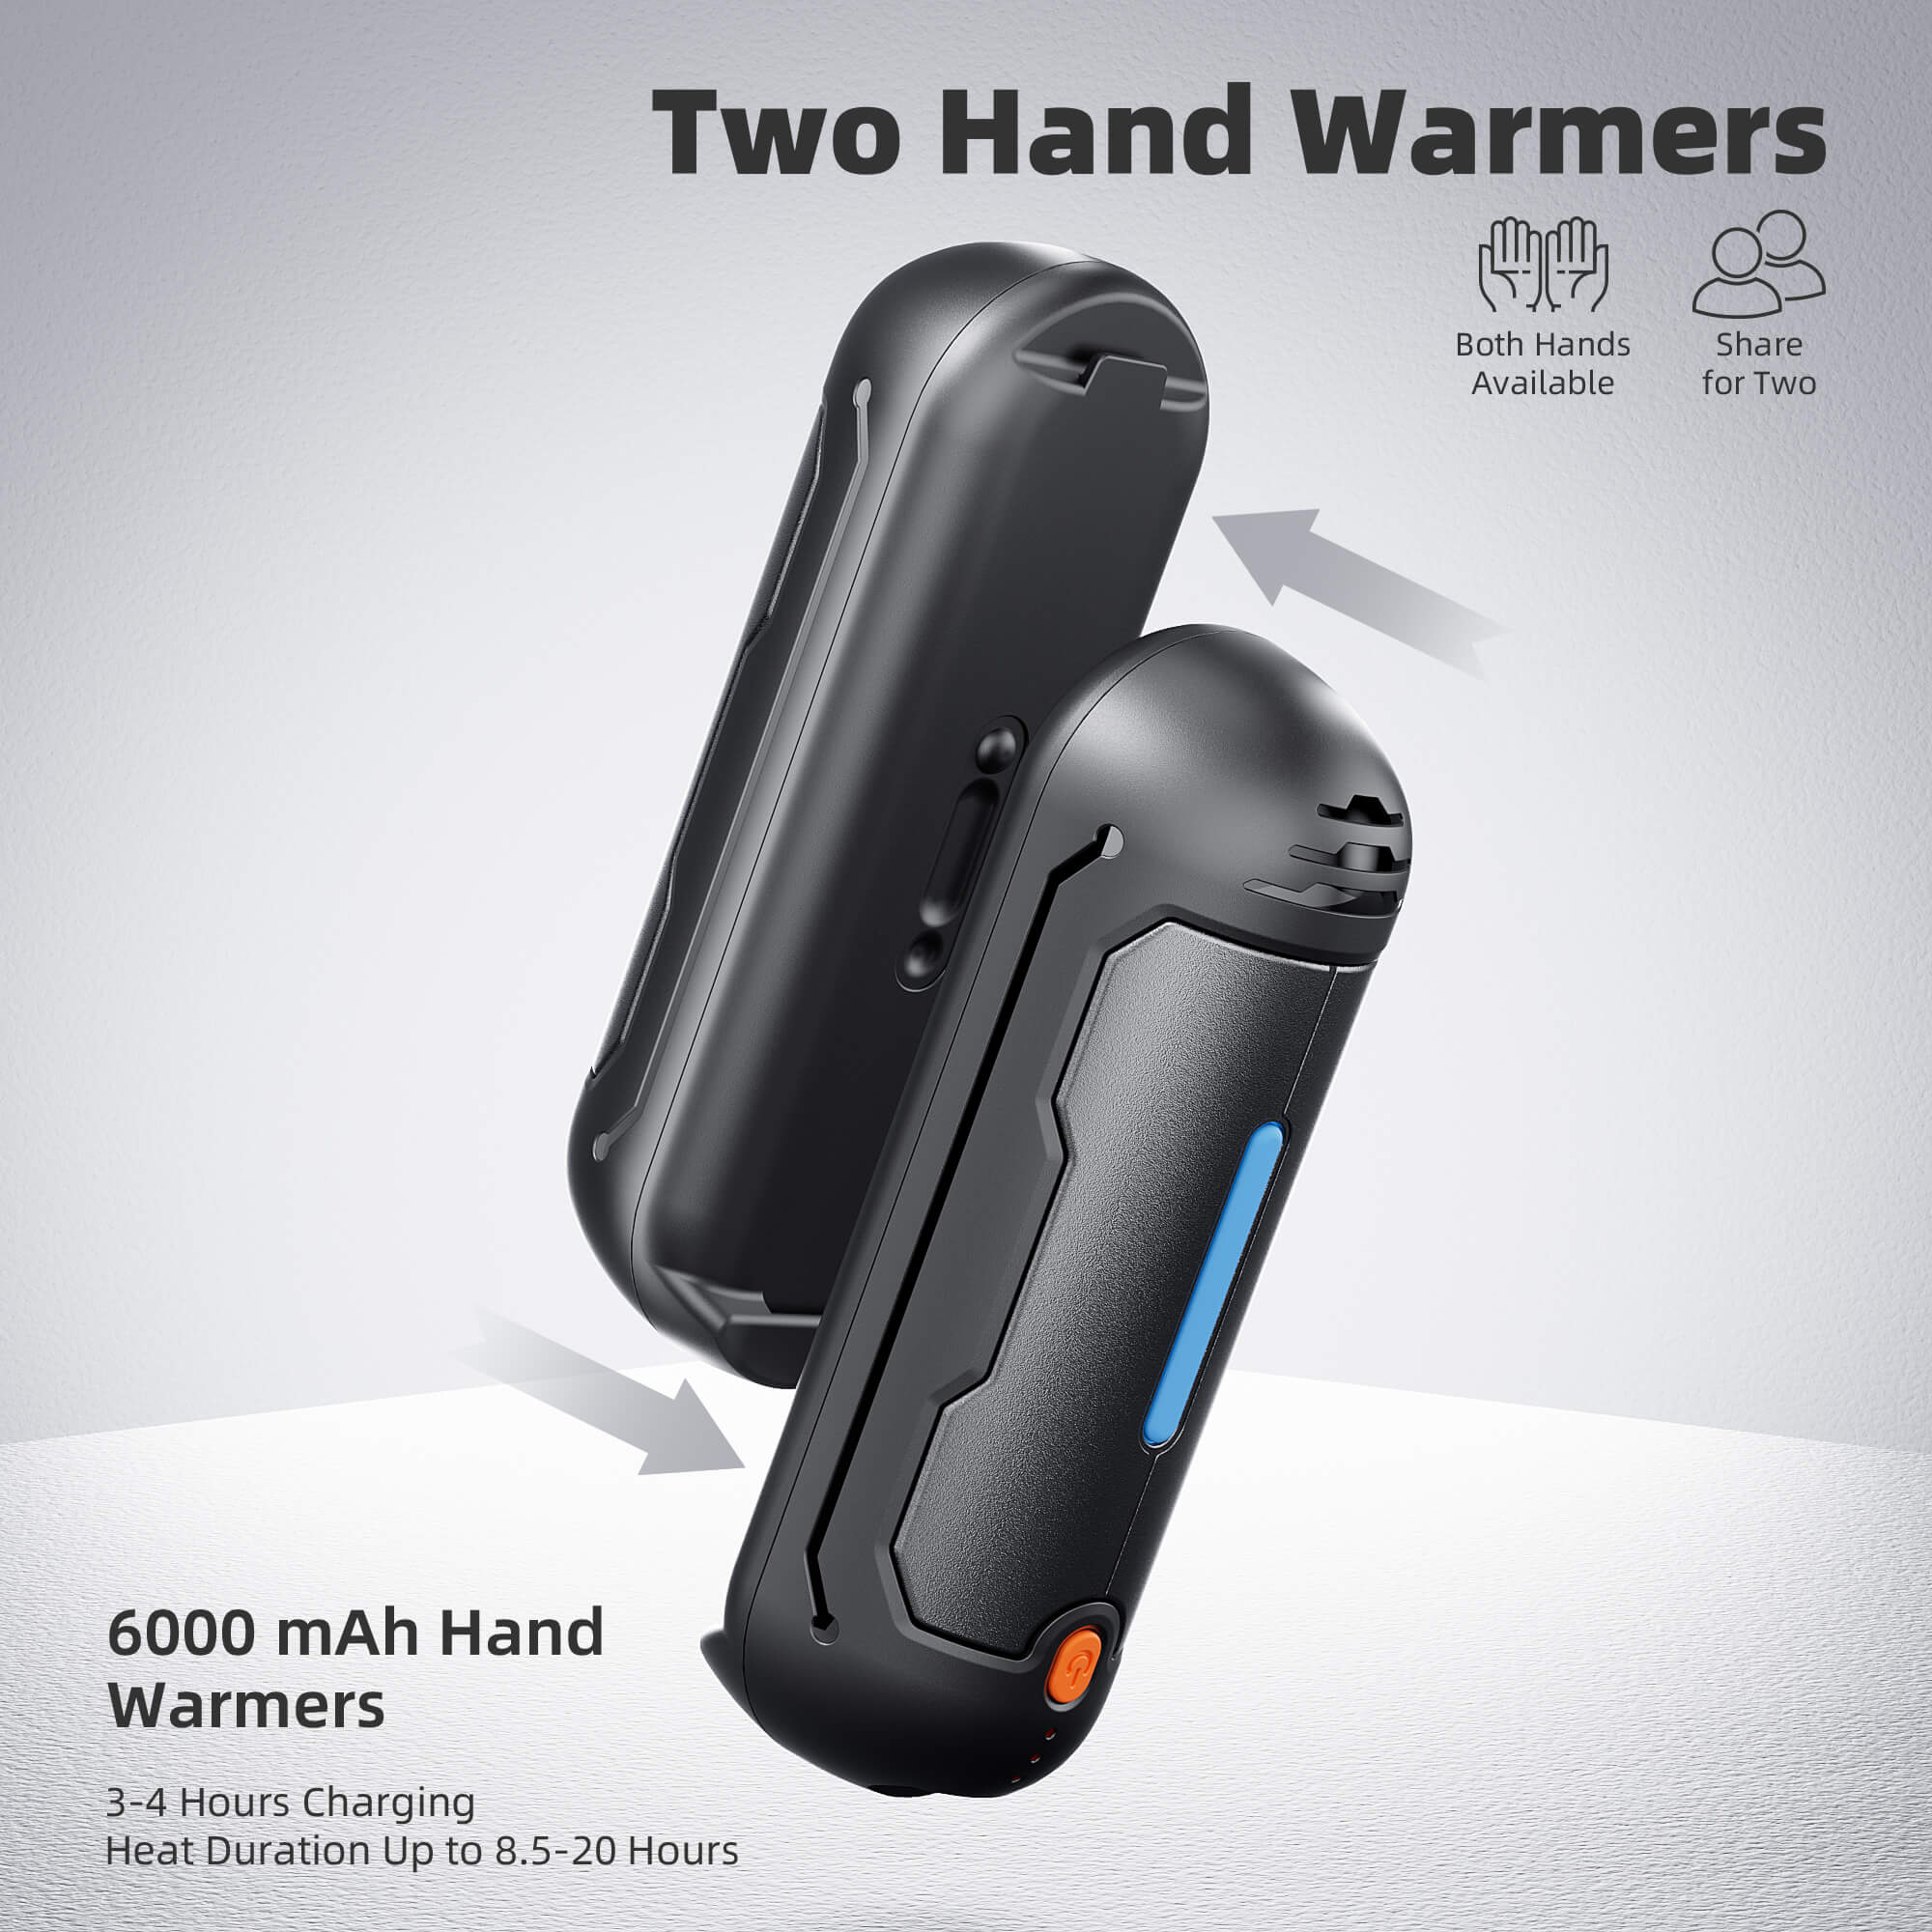 Rechargeable Hand Warmers 2 Pack, Meromore Magnetic Electric Hand Warmers  with 10000 mAh, 3 Heat Setting, 16 Hrs Warmth for Outdoors, Hunting,  Camping, Best Gifts for Men Women, Raynaud 